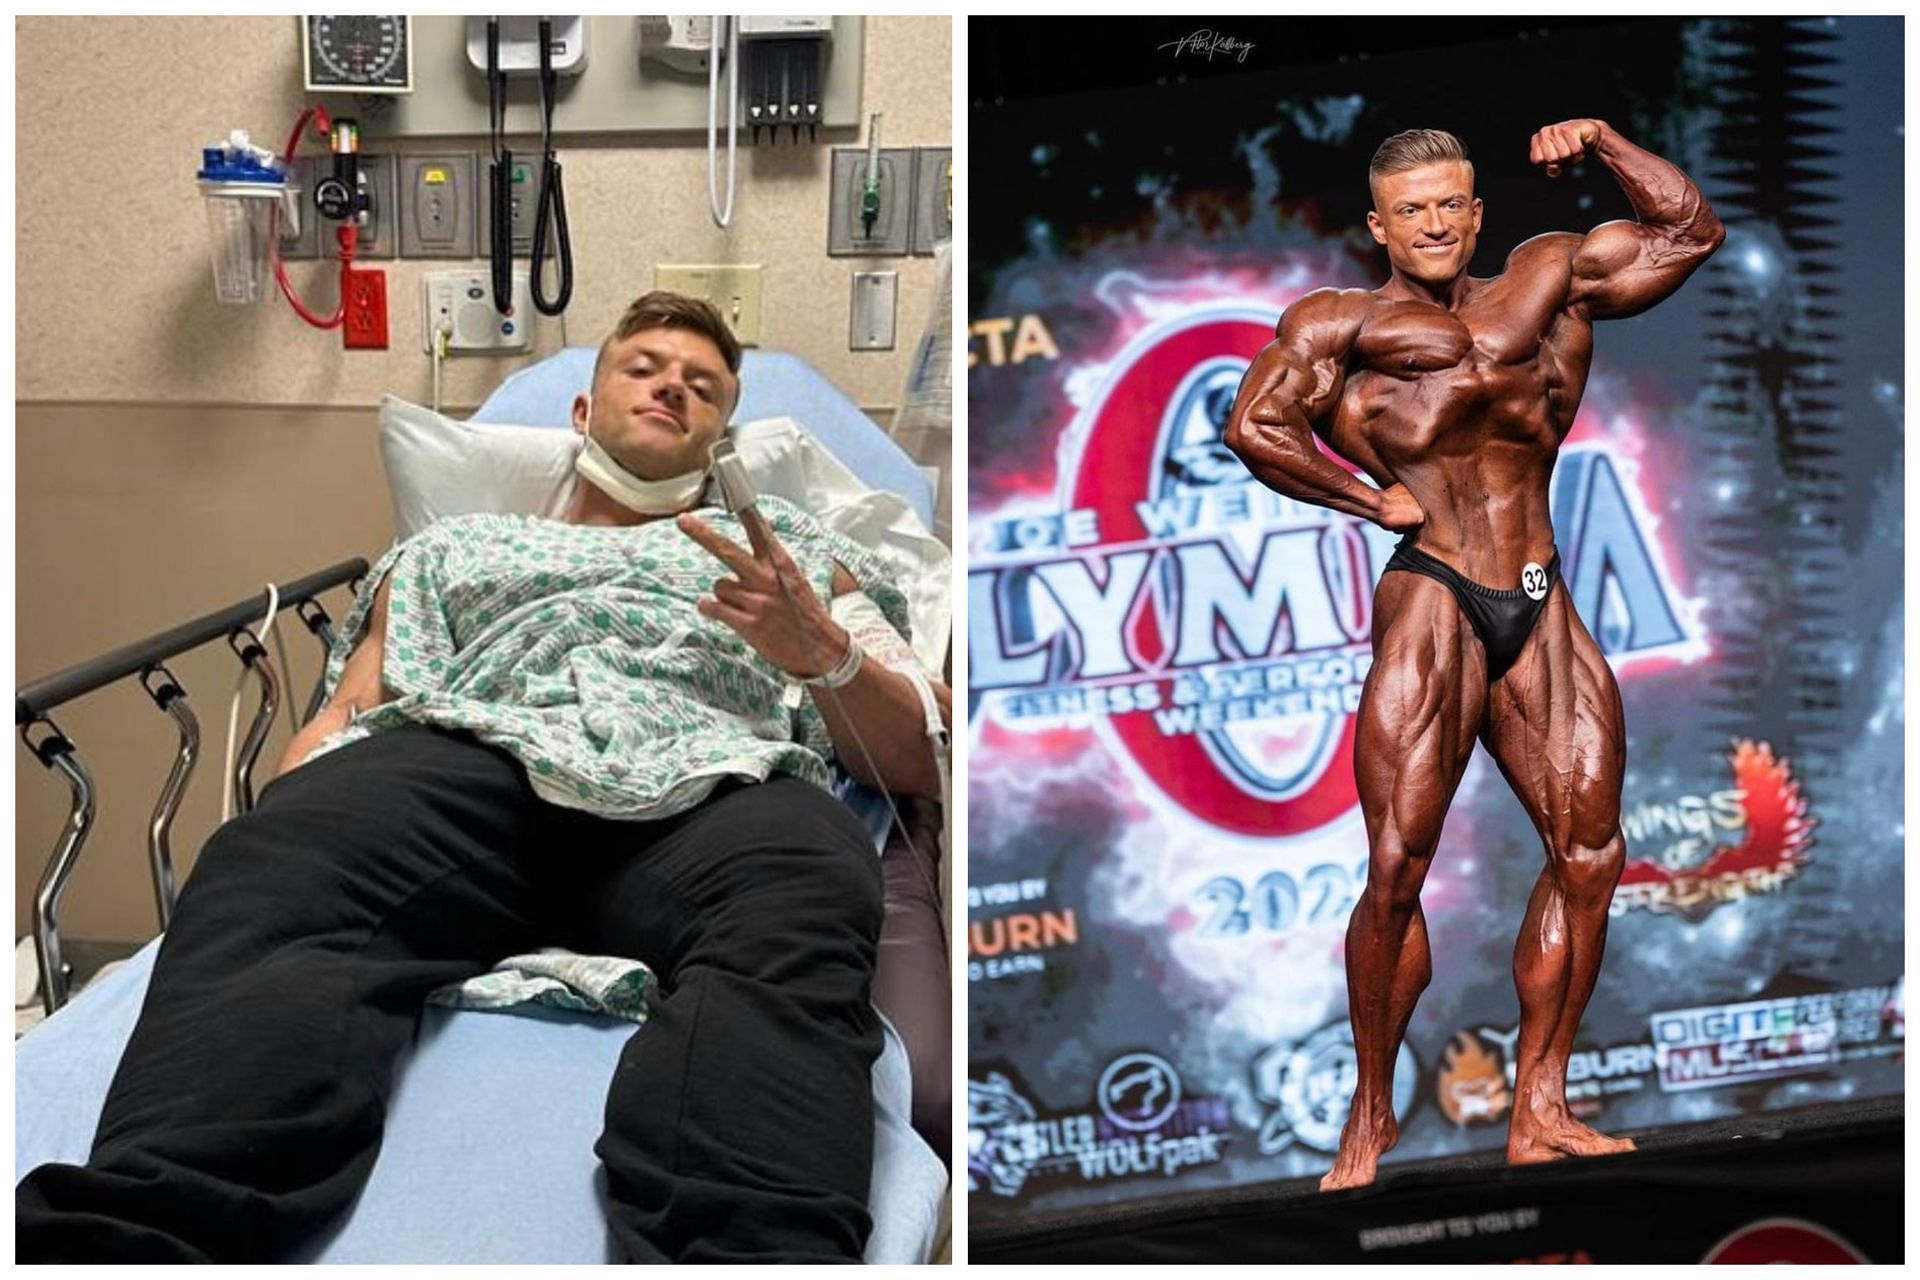 Urs Kalecinski opens up about being hospitalized 5 days before 2023 Arnold Classic